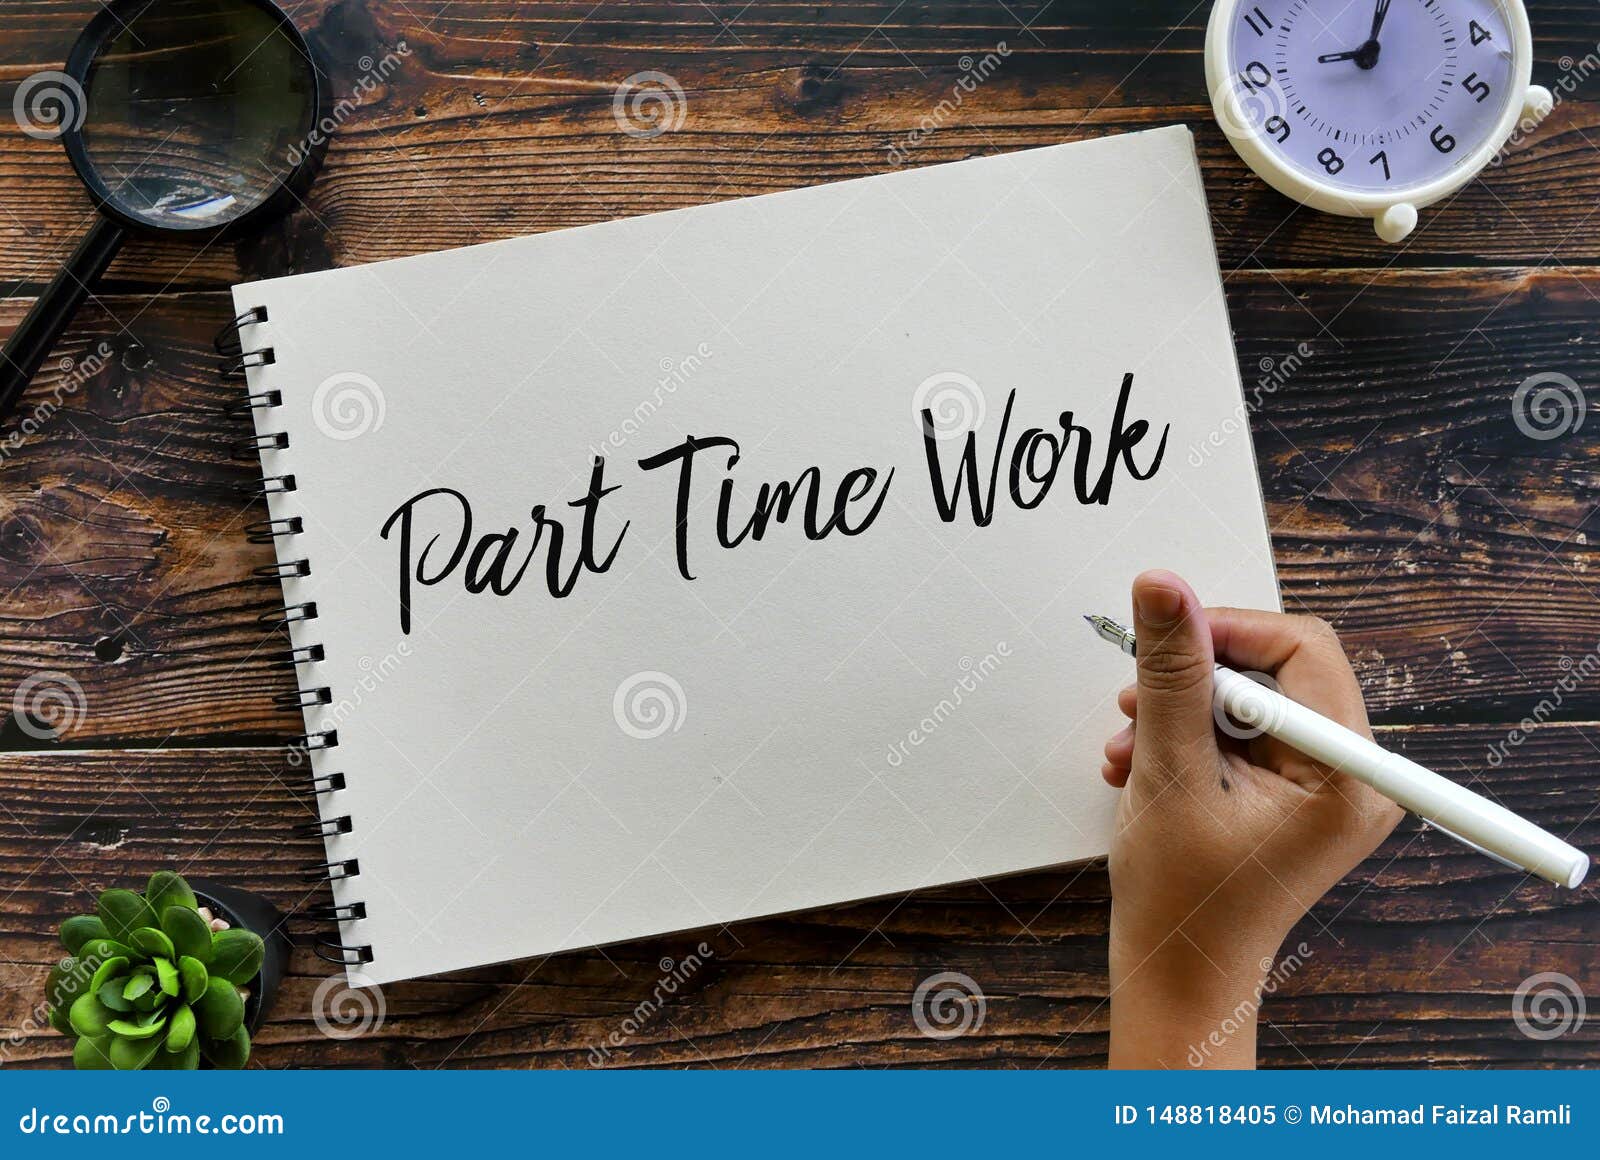 top view of magnifying glass,plant,clock and hand holding pen writing part time work on notebook on wooden background